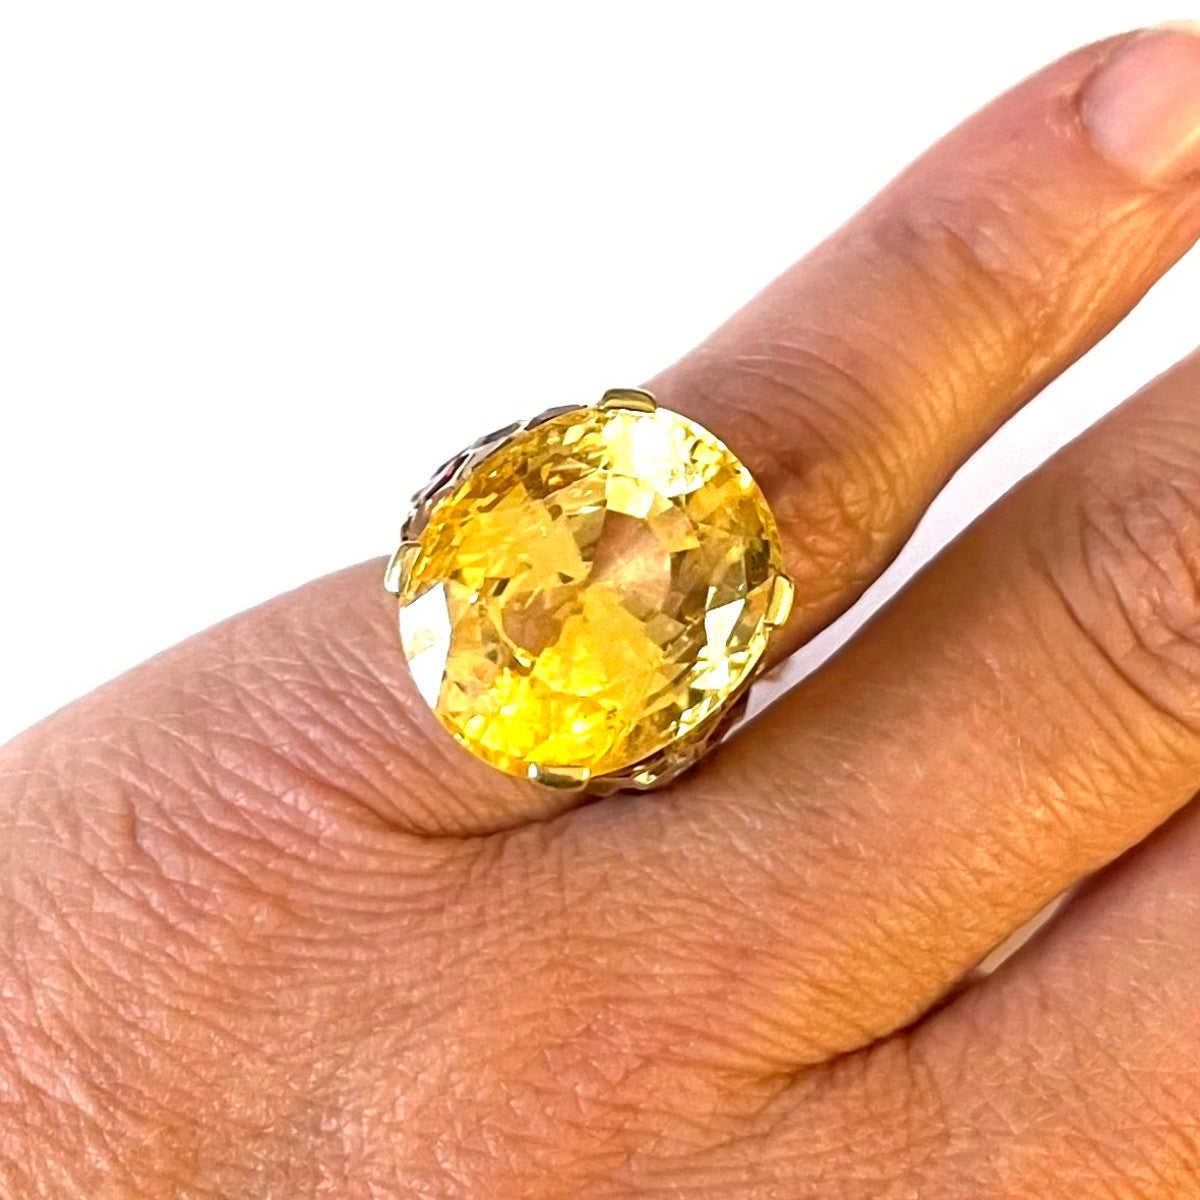 Suzanne Belperron French 1940s 18KT Yellow Gold Yellow Sapphire & Citrine Ring on finger